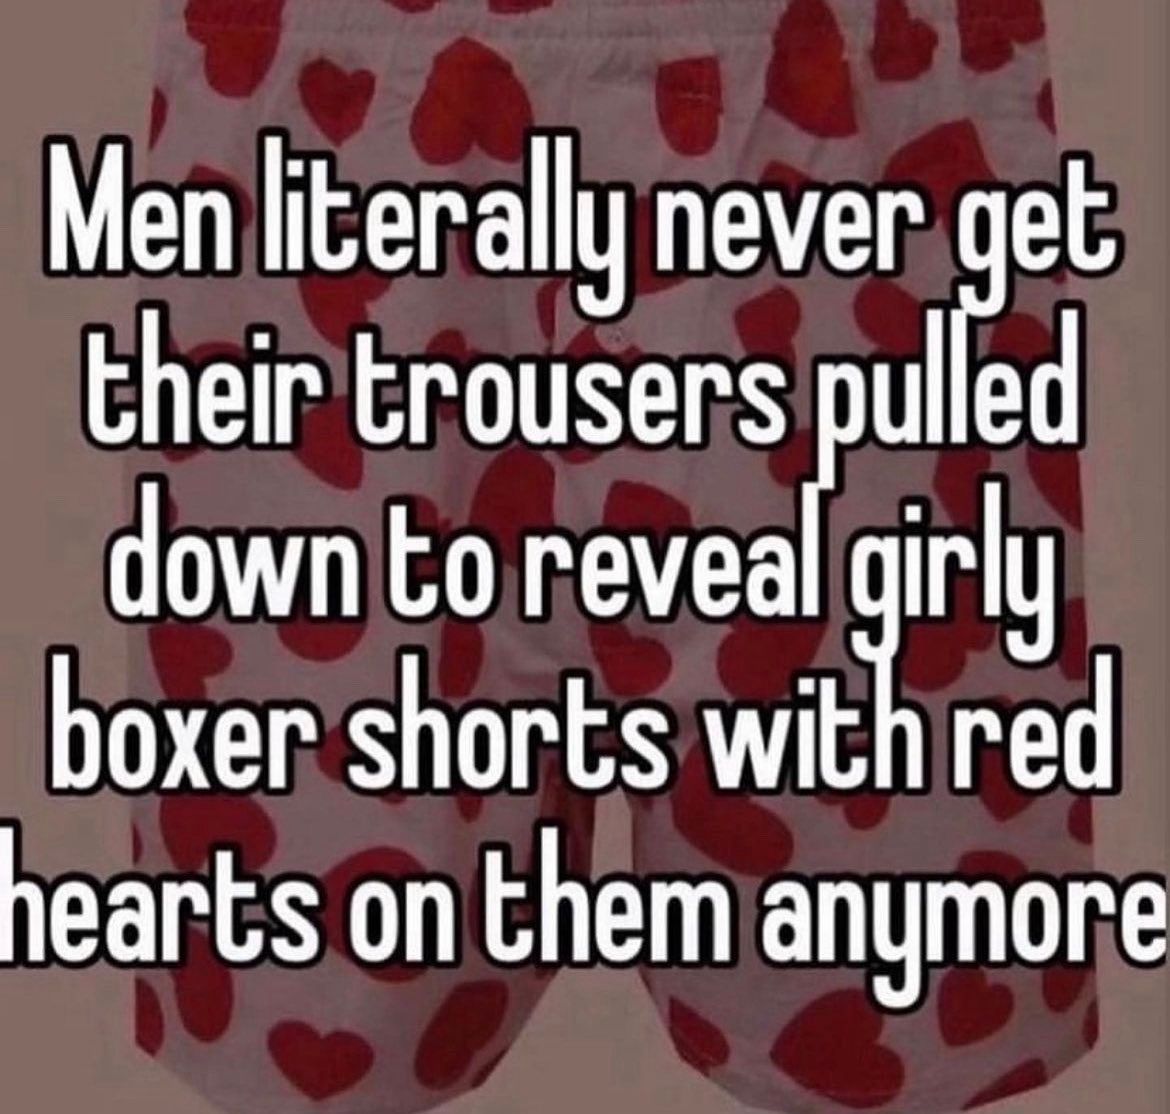 Men literally never get
their trousers pulled
down to reveal girly
boxer shorts with red
hearts on them anymore